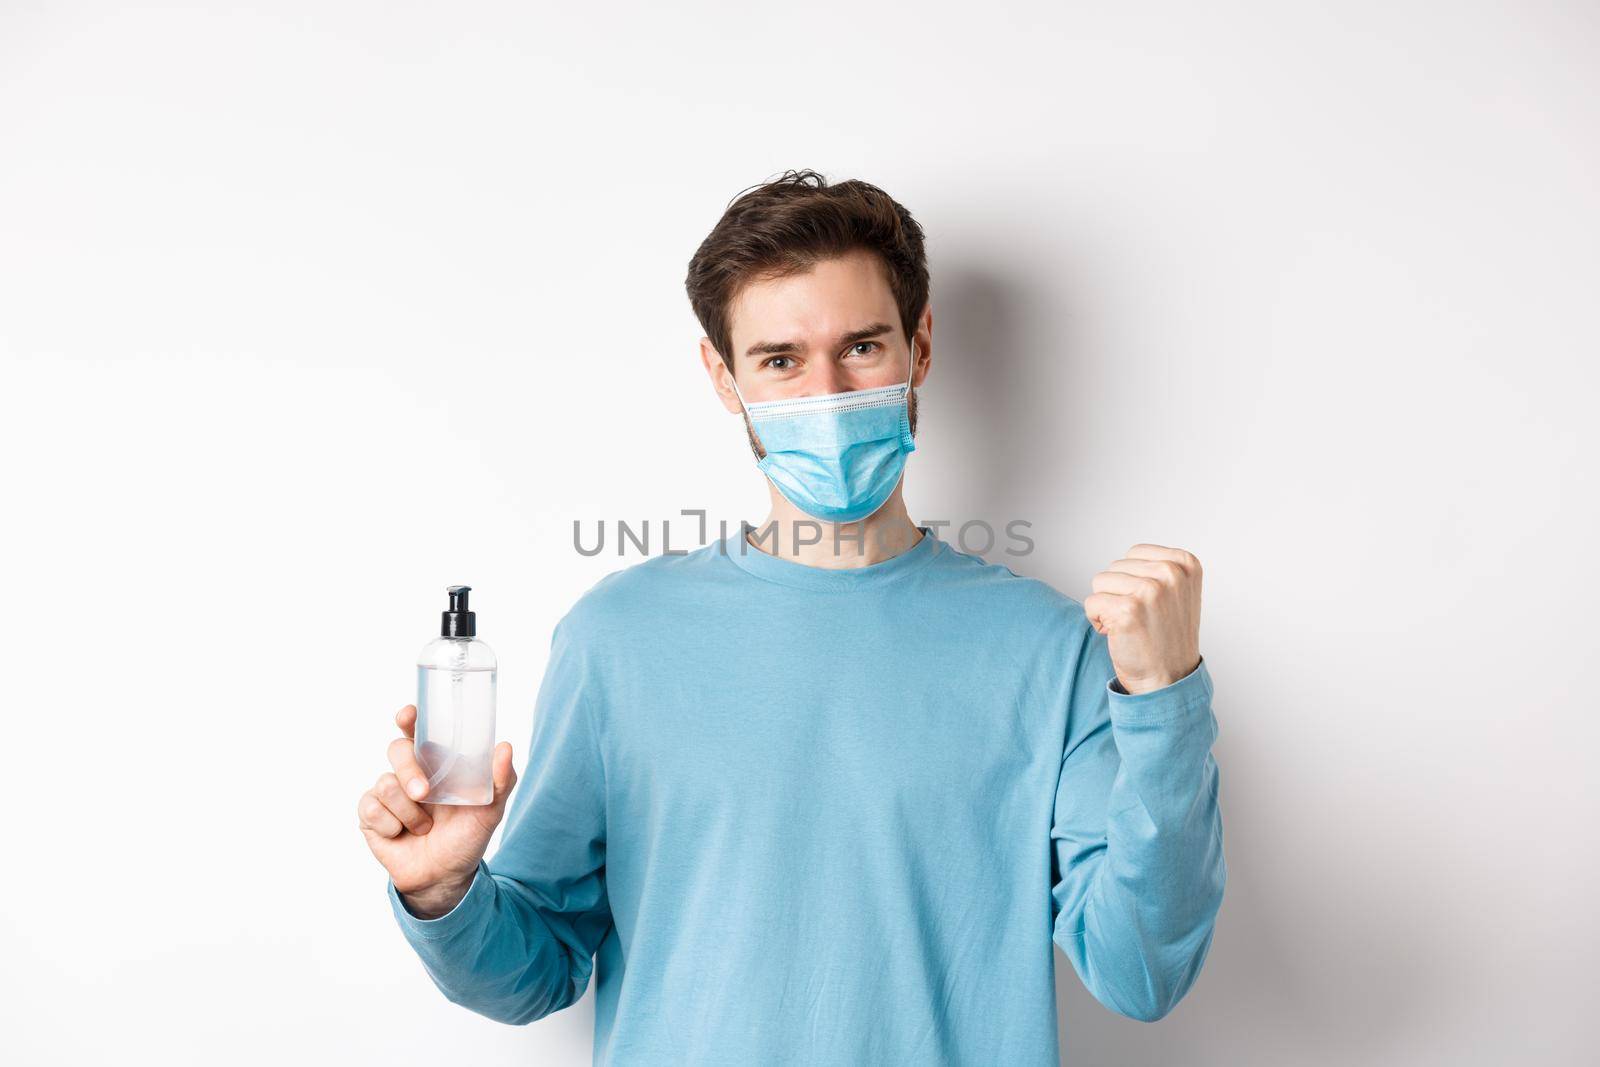 Covid-19, health and quarantine concept. Cheerful man in face mask celebrating, showing fist pump and bottle with hand sanitizer, fighting germs, white background.